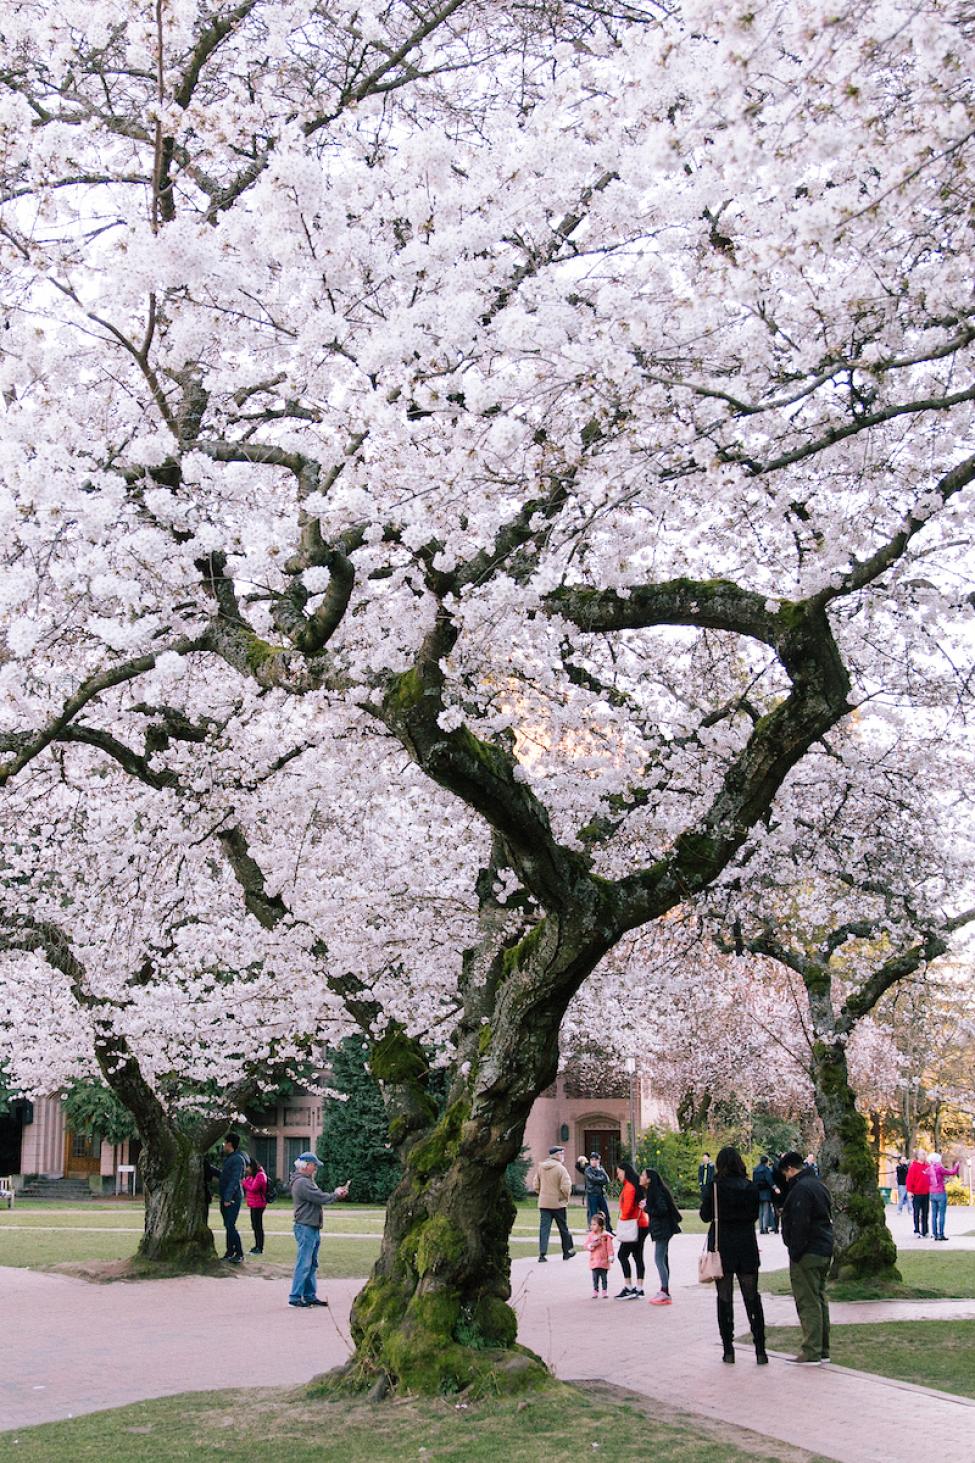 A blooming pink cherry blossom tree in the UW quad